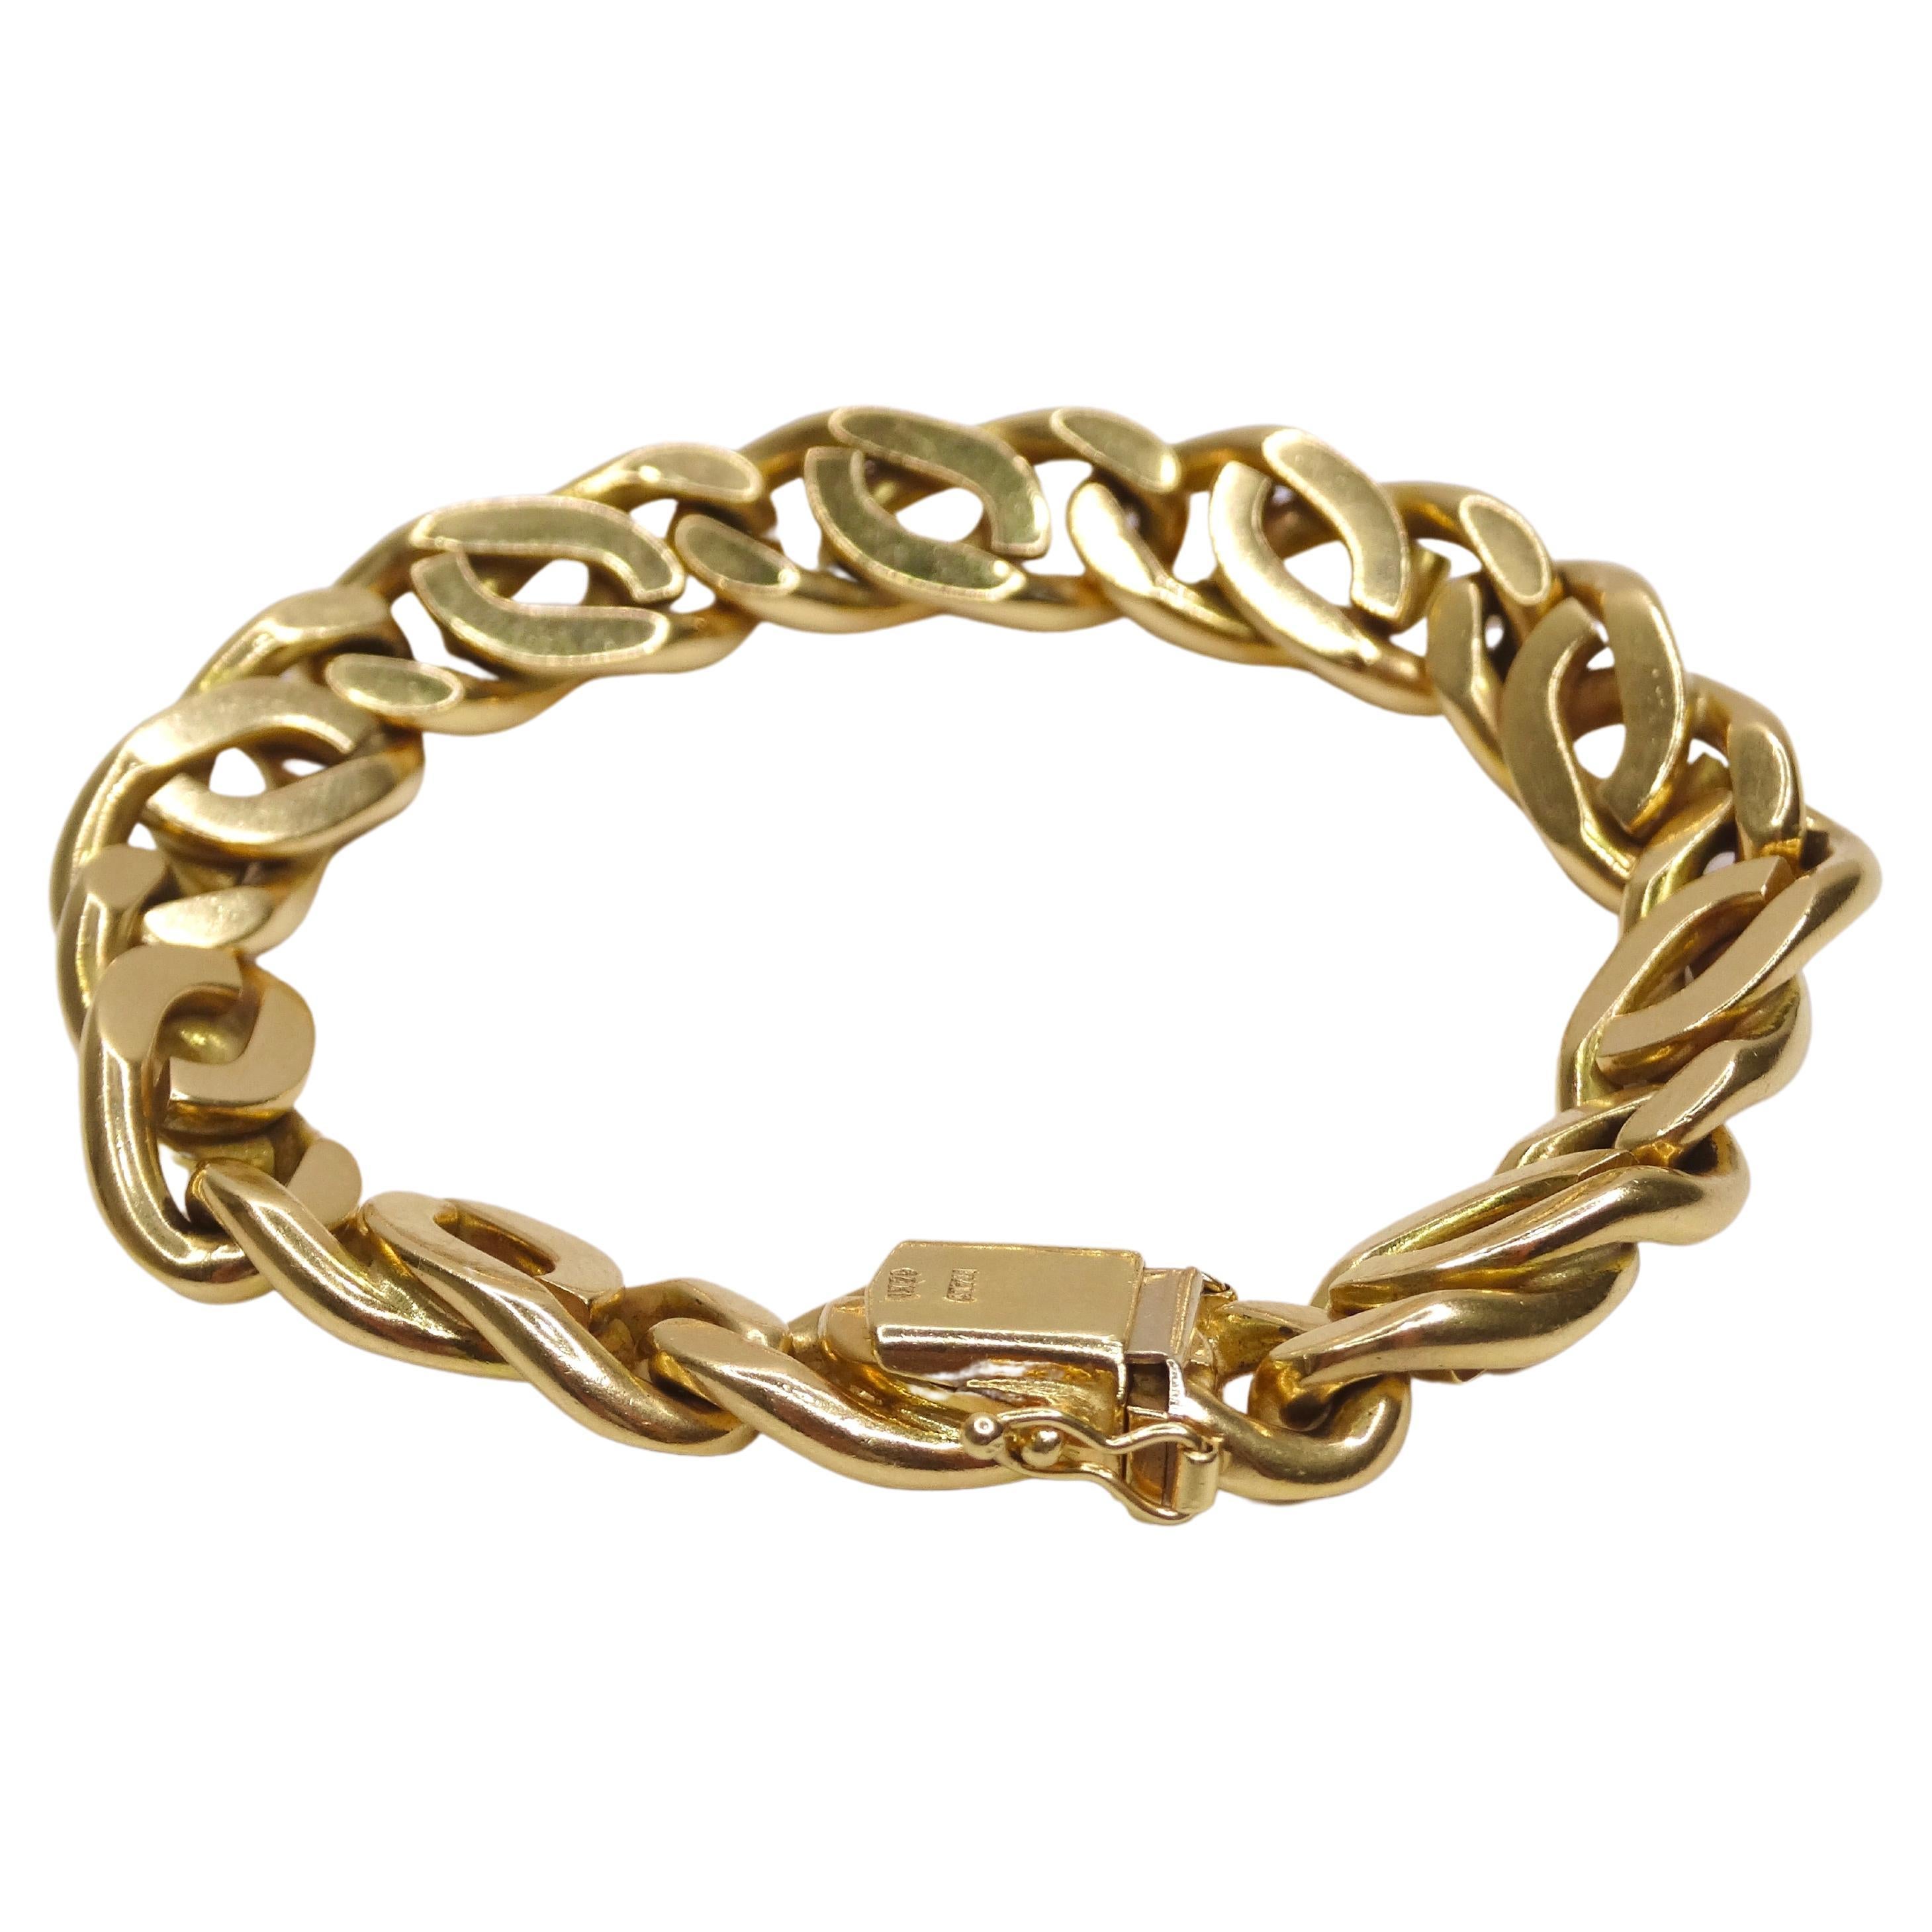 You can't go wrong with a gold cuban chain link bracelet! This is a cuban-link style bracelet have links that twist into a cable-like design, which gives it a bit of a traditional and classic look. This is a perfect bracelet to add to your